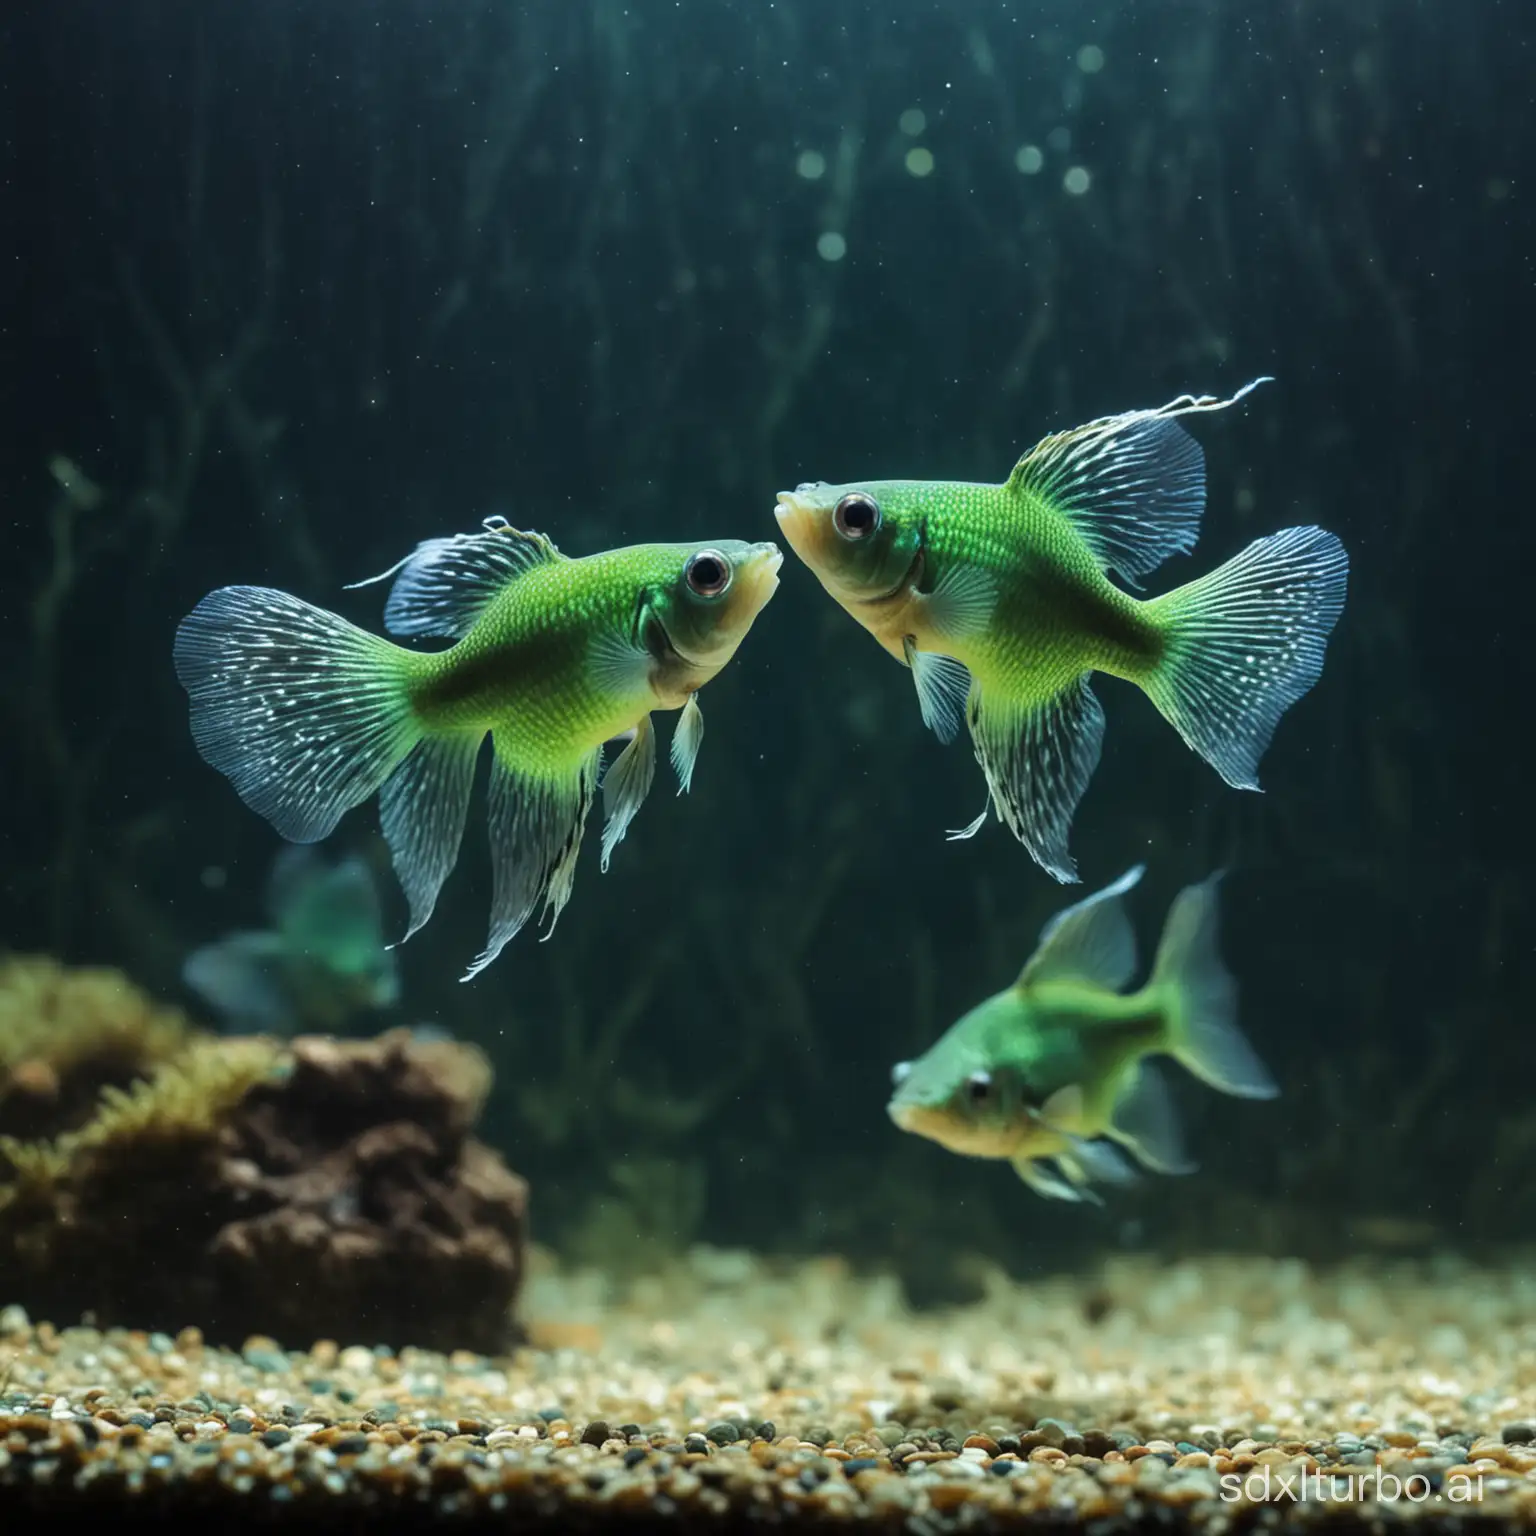 A pair of guppies. in the aquarium the rule of third composition beautiful green light